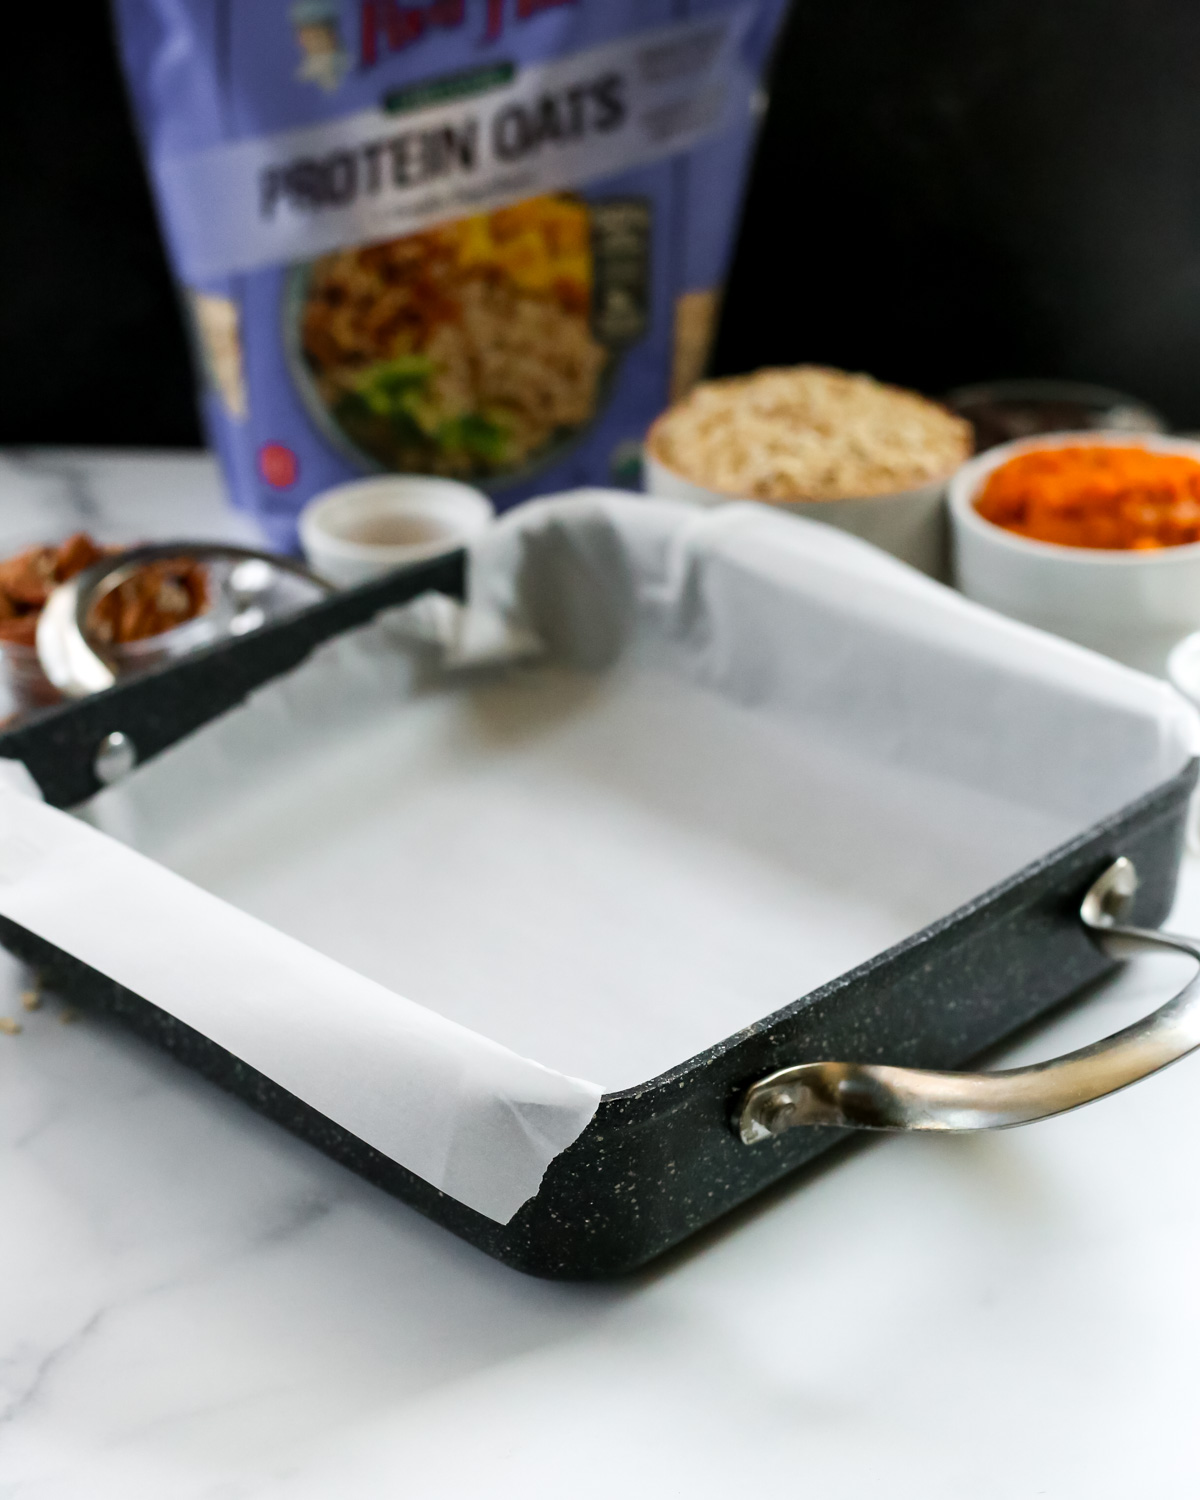 A square baking sheet with silver handles sits in front of the ingredients of making easy pumpkin oat bars, with a piece of white parchment paper lining the inside of the baking pan